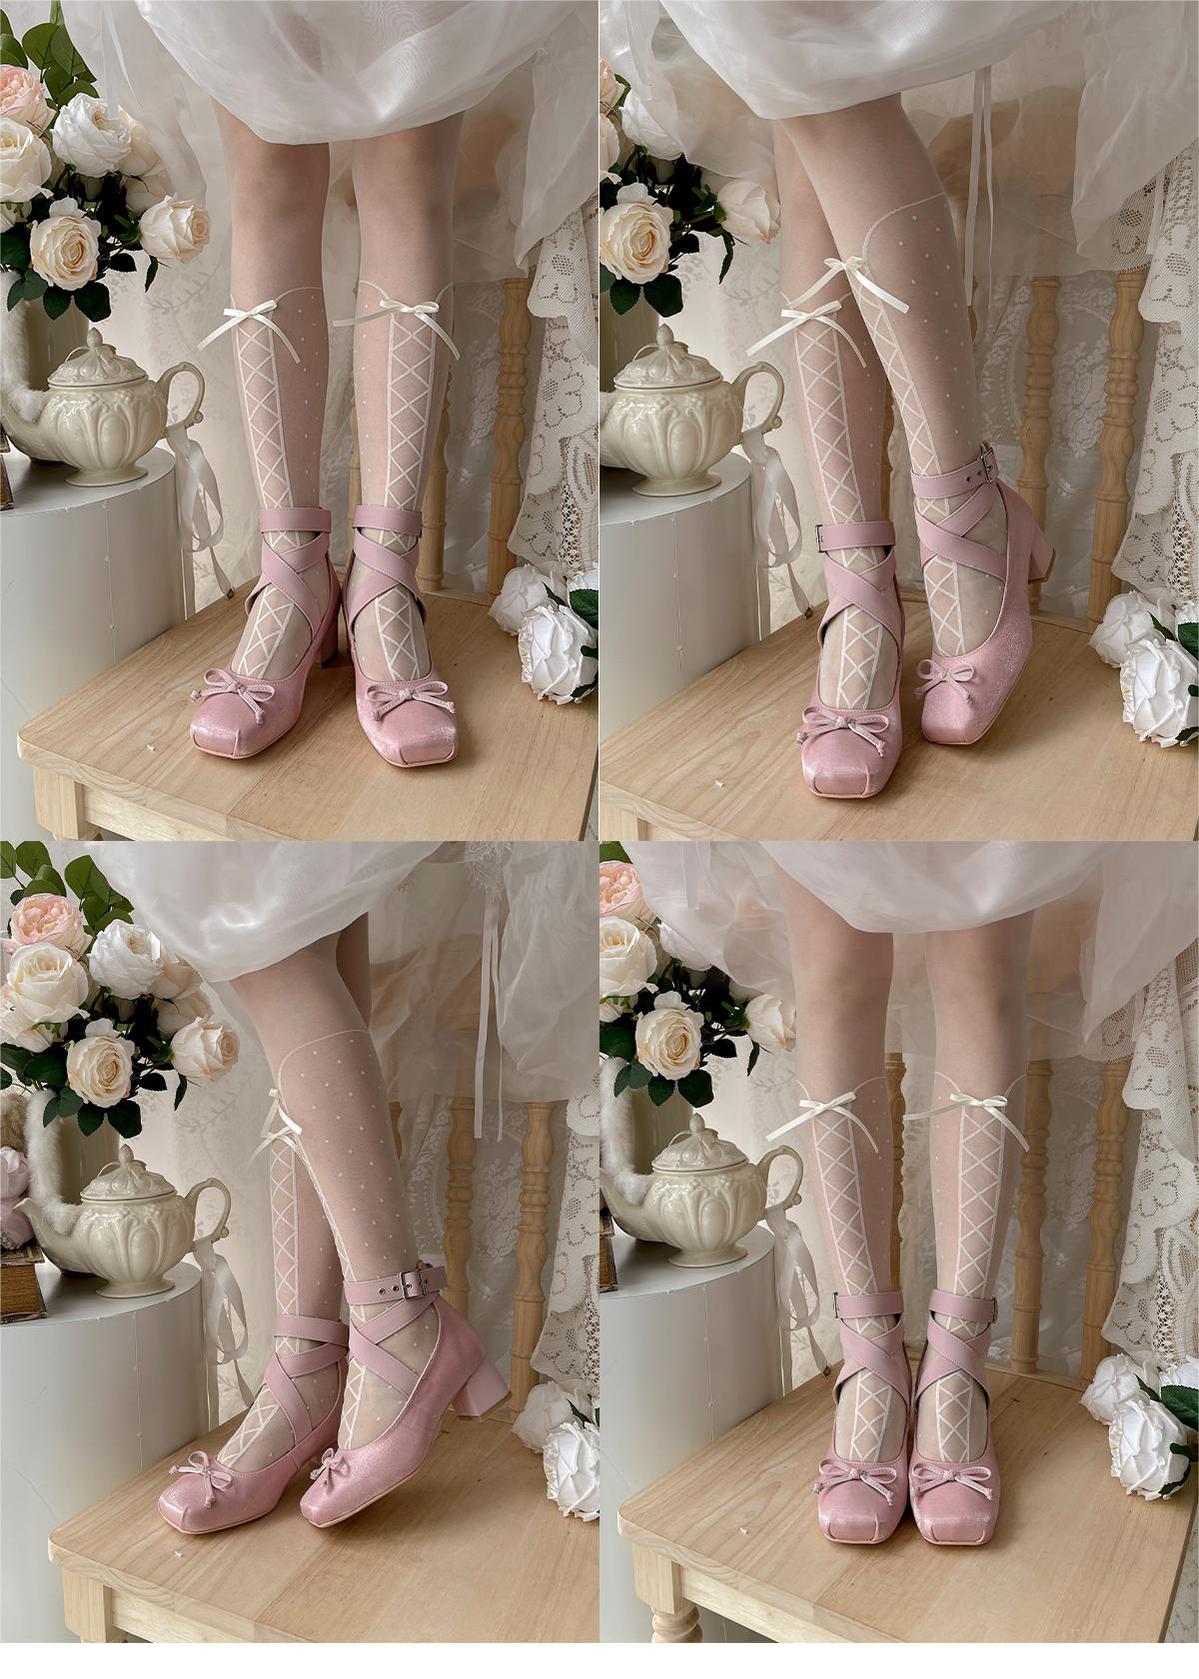 Lolita Shoes Ballet Style Square Toe Bow Heels Shoes 35592:543916